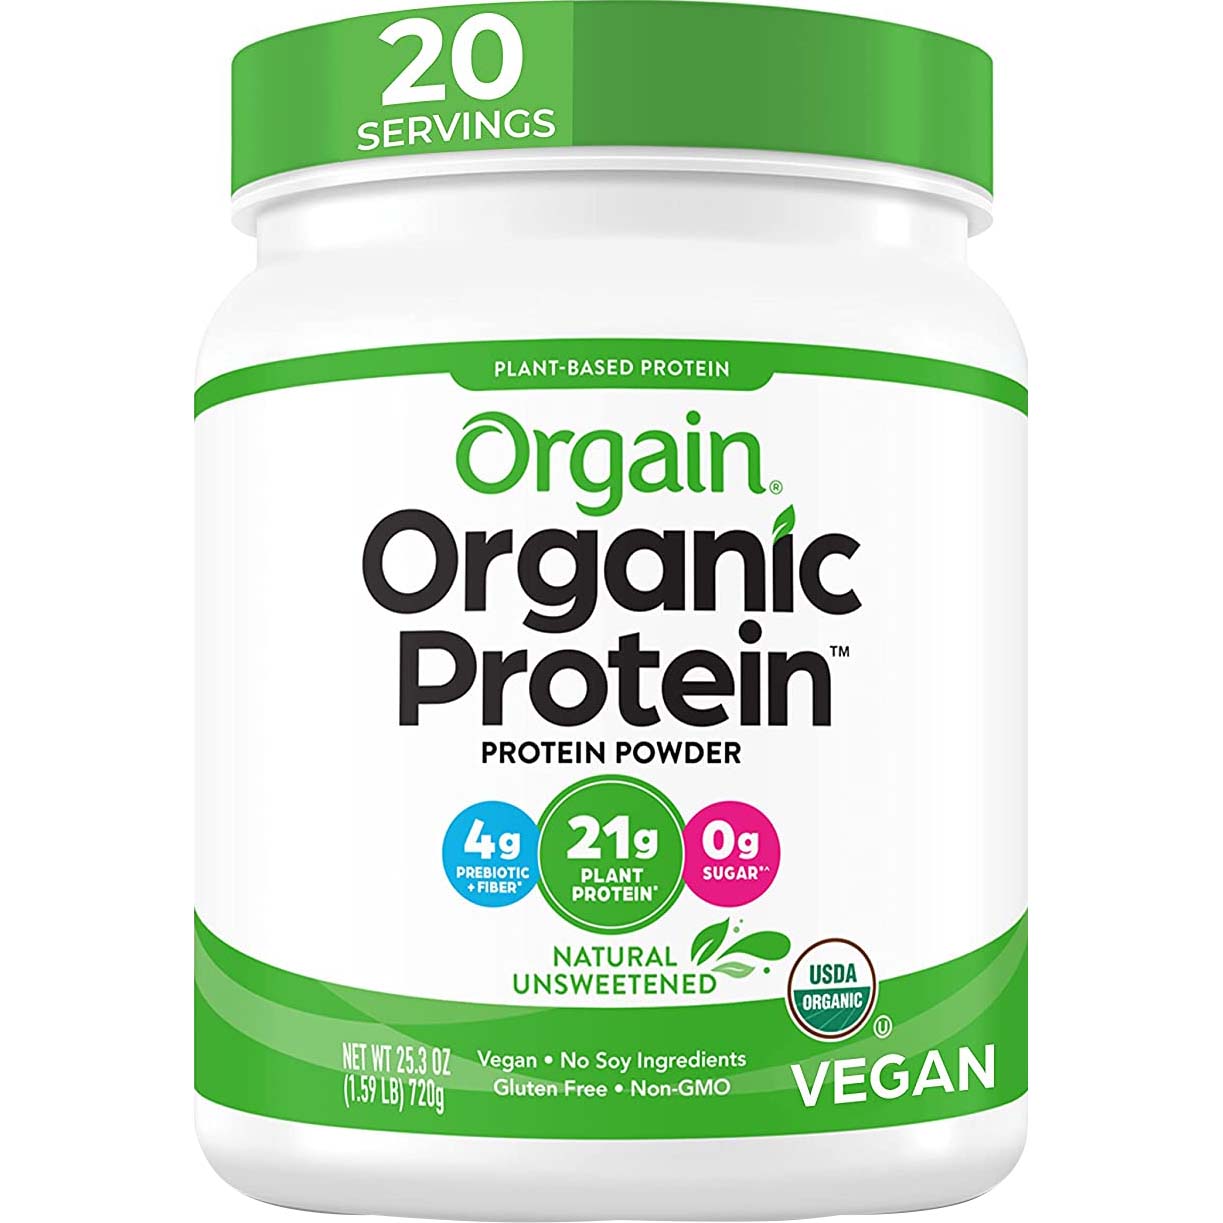 Orgain Organic Protein Plant Based Protein, Natural Unsweetened, 1.59 Lb